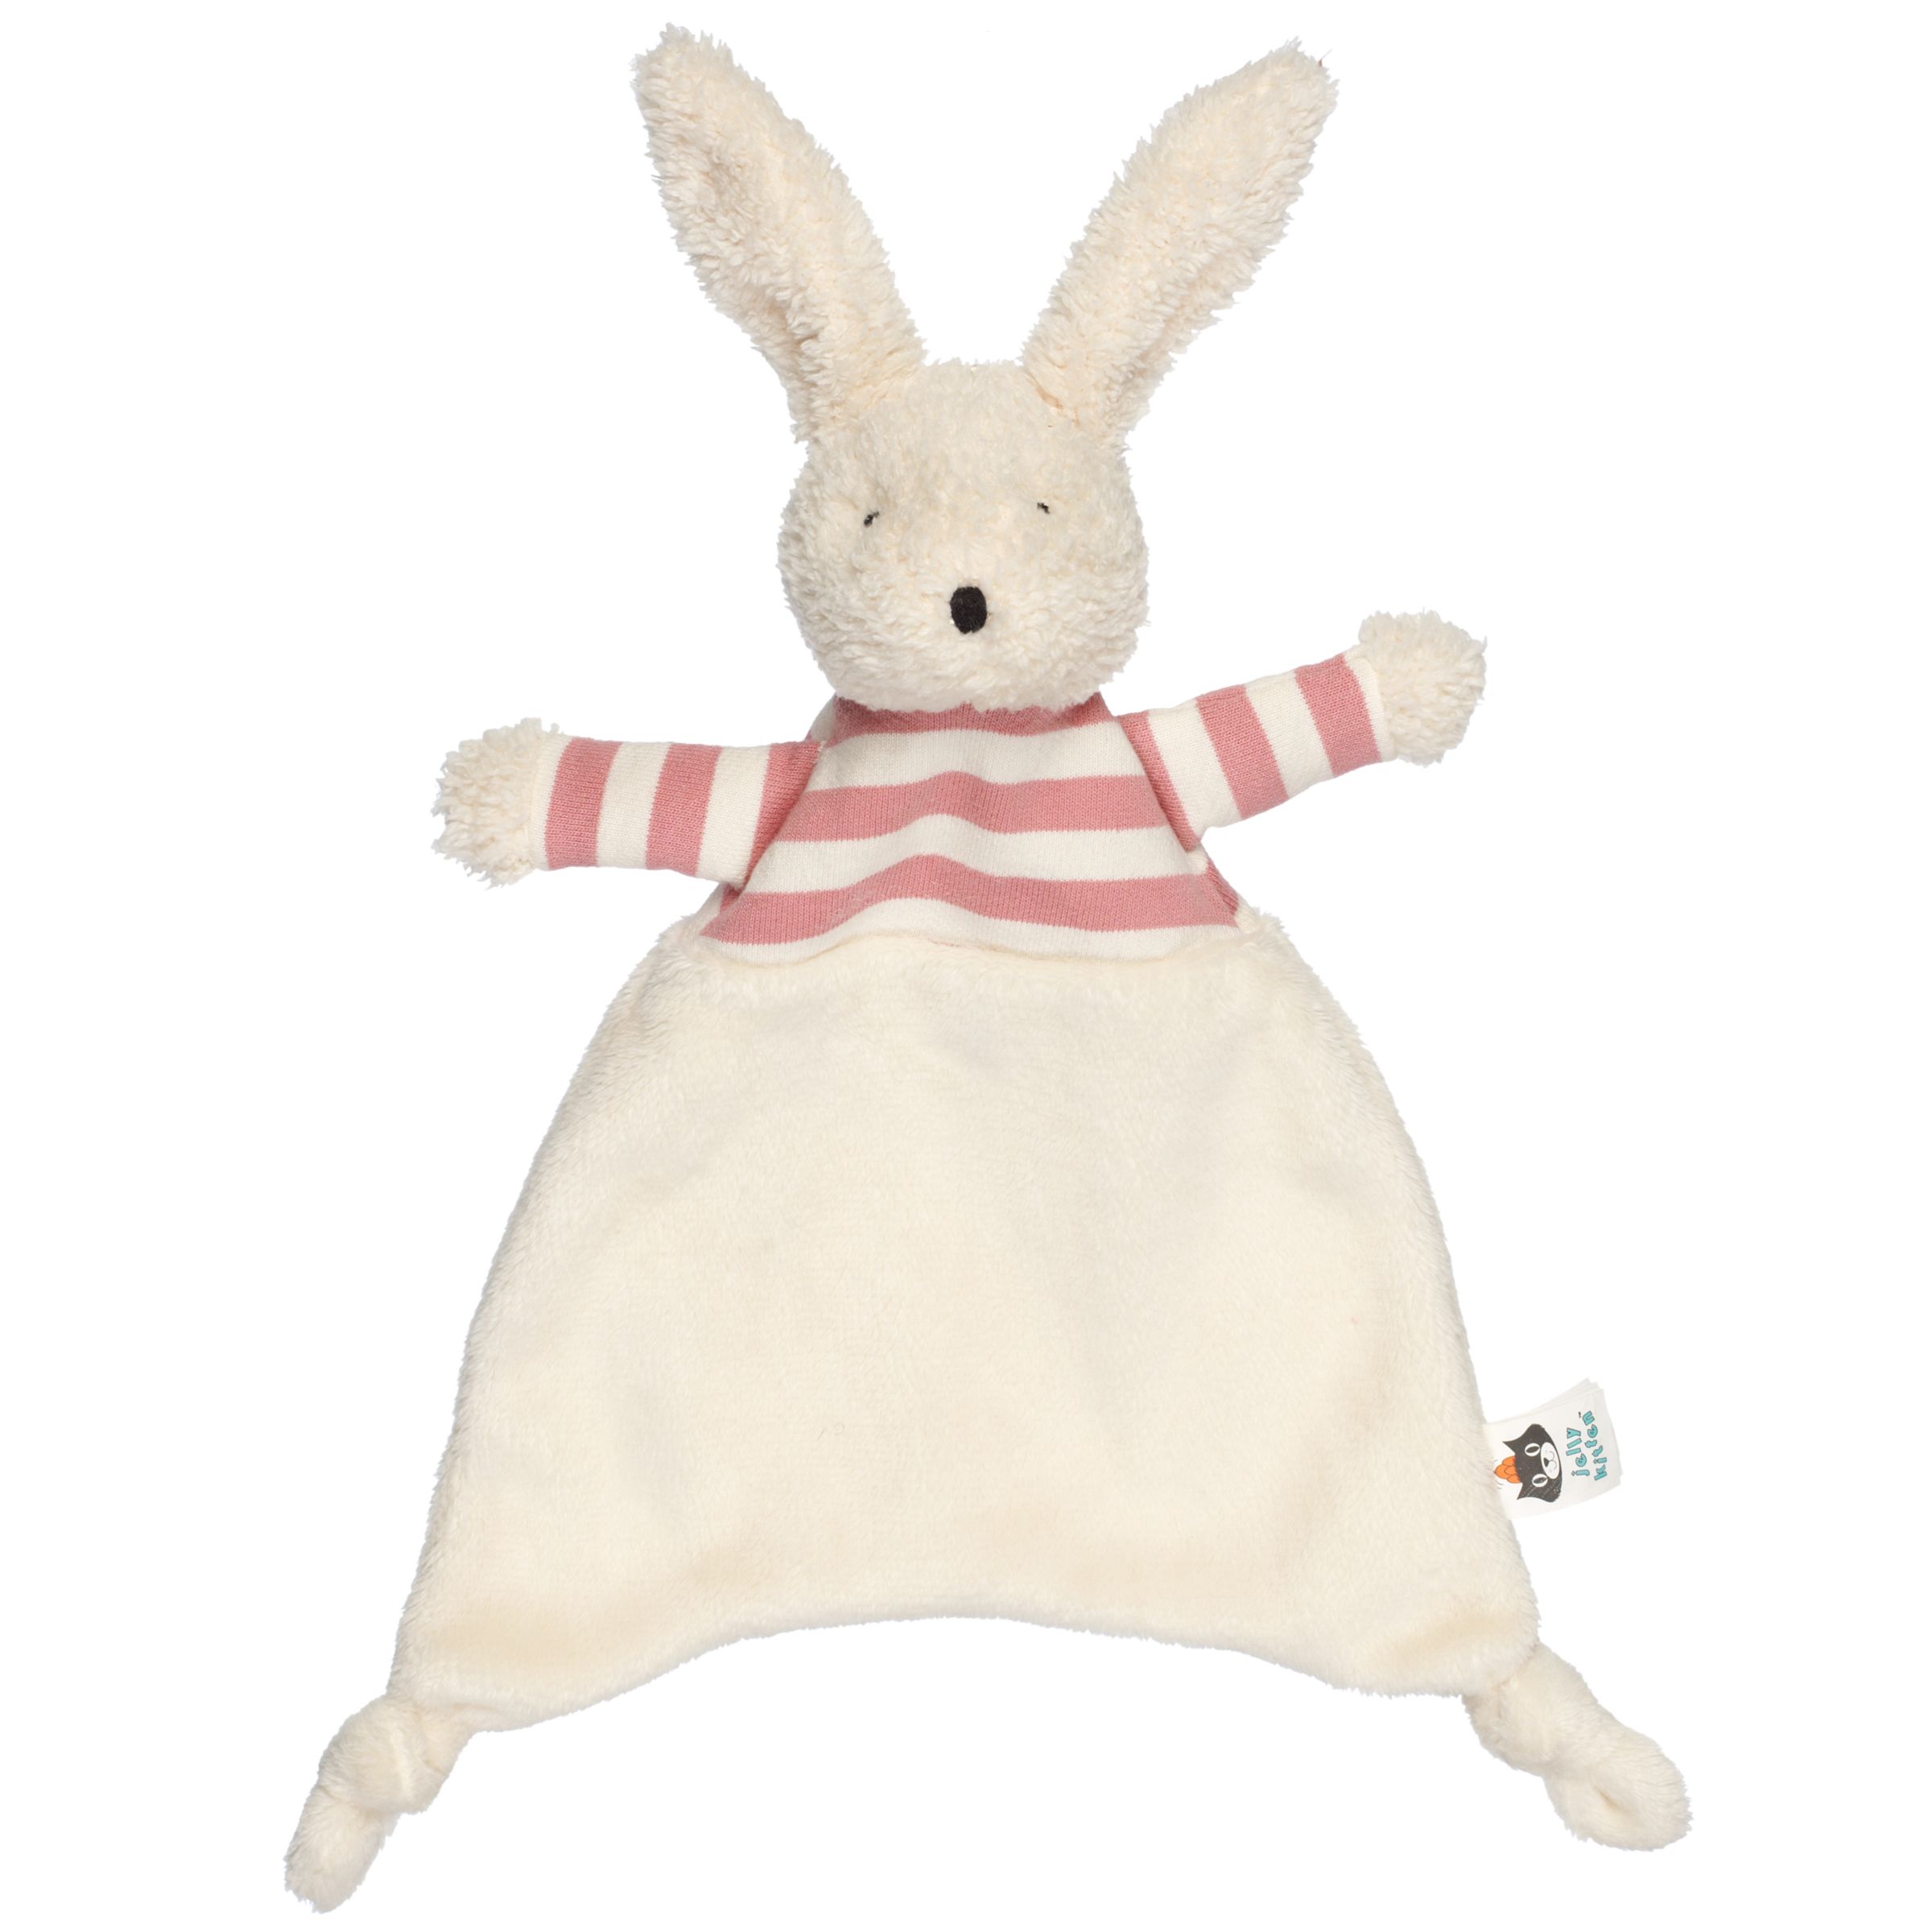 Jellycat Bredita Bunny Soother Soft Toy